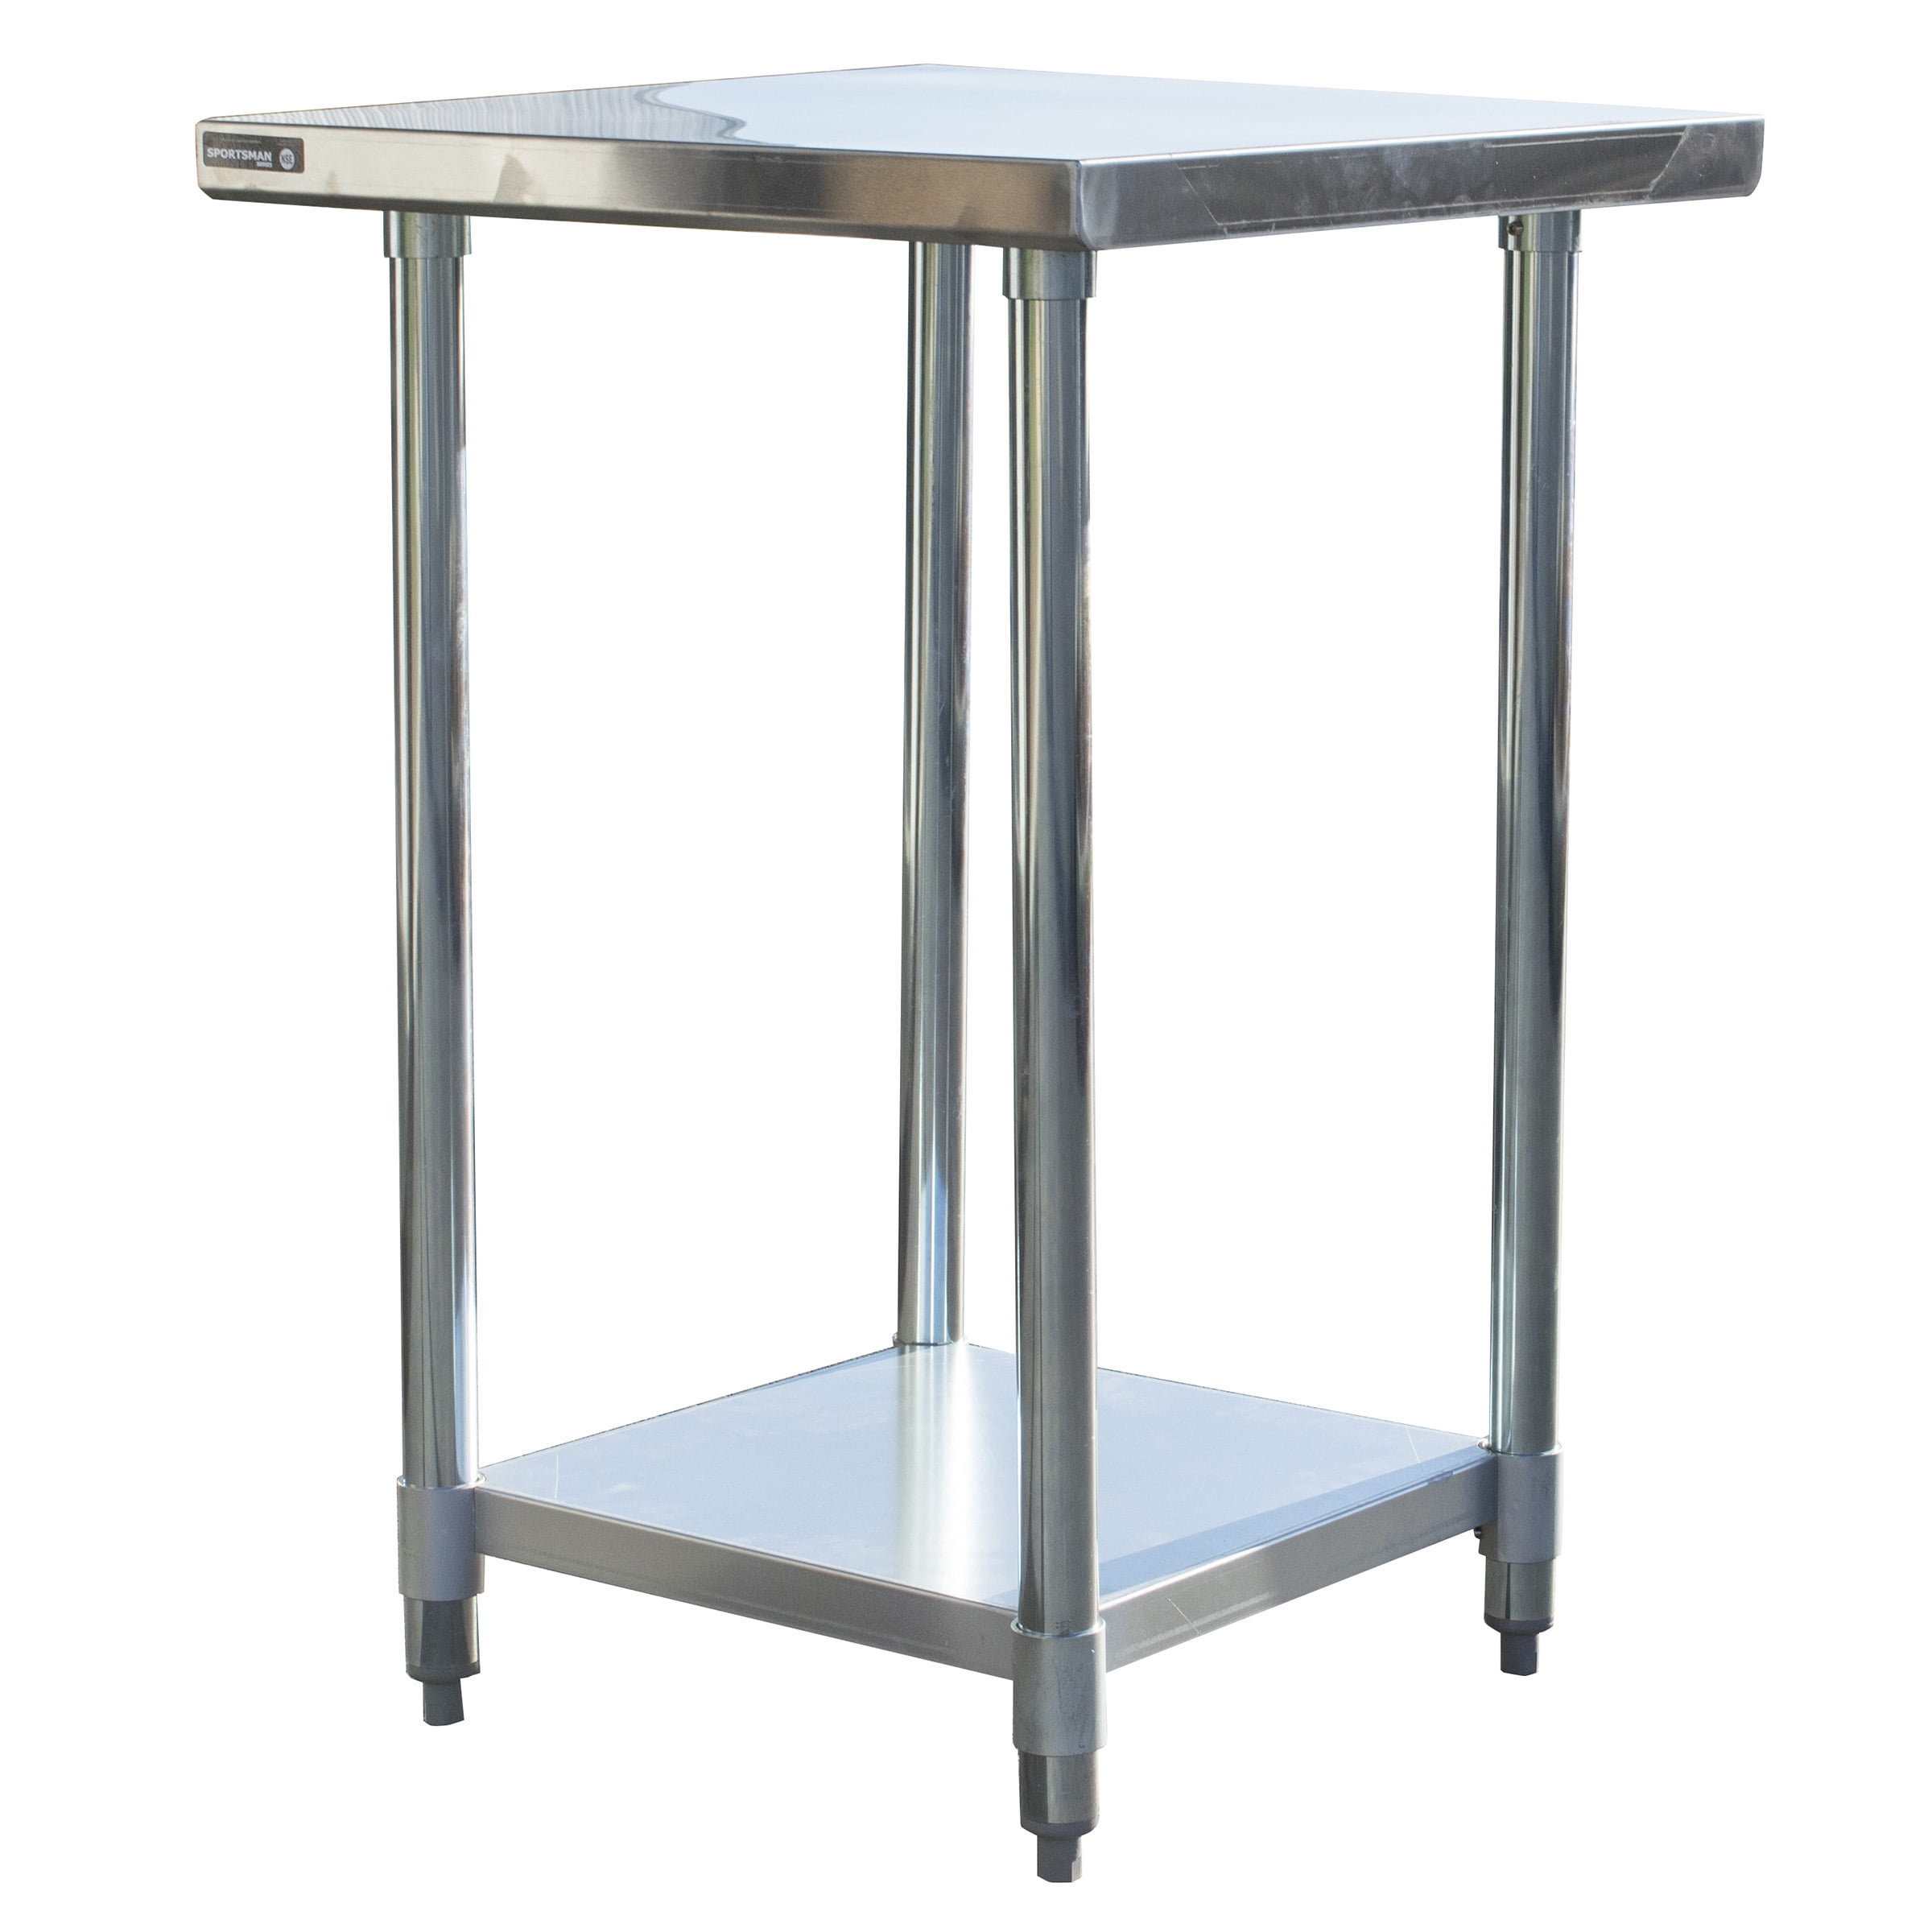 Picture of Buffalo Tools SSWTABLE24 24 x 24 in. Stainless Steel Work Table, Silver